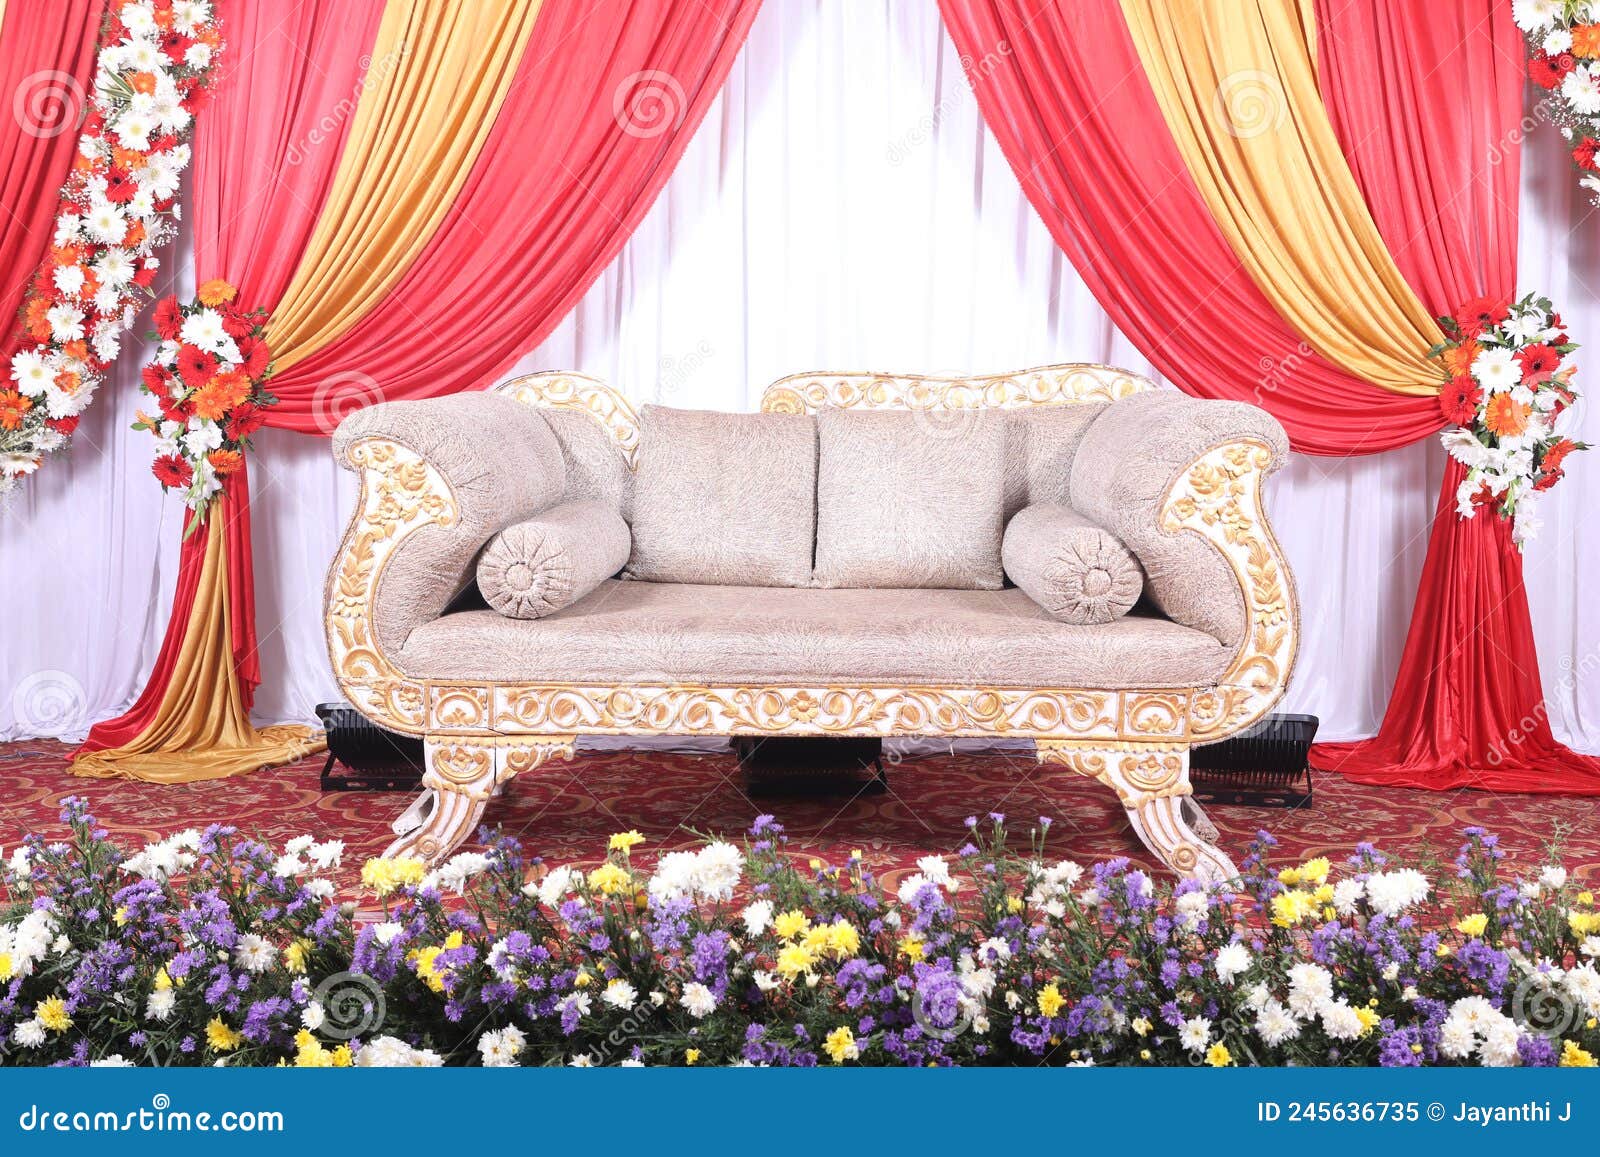 Wedding Stage Decoration with Flower Backdrop Stock Image - Image of  filled, backdrop: 245636735